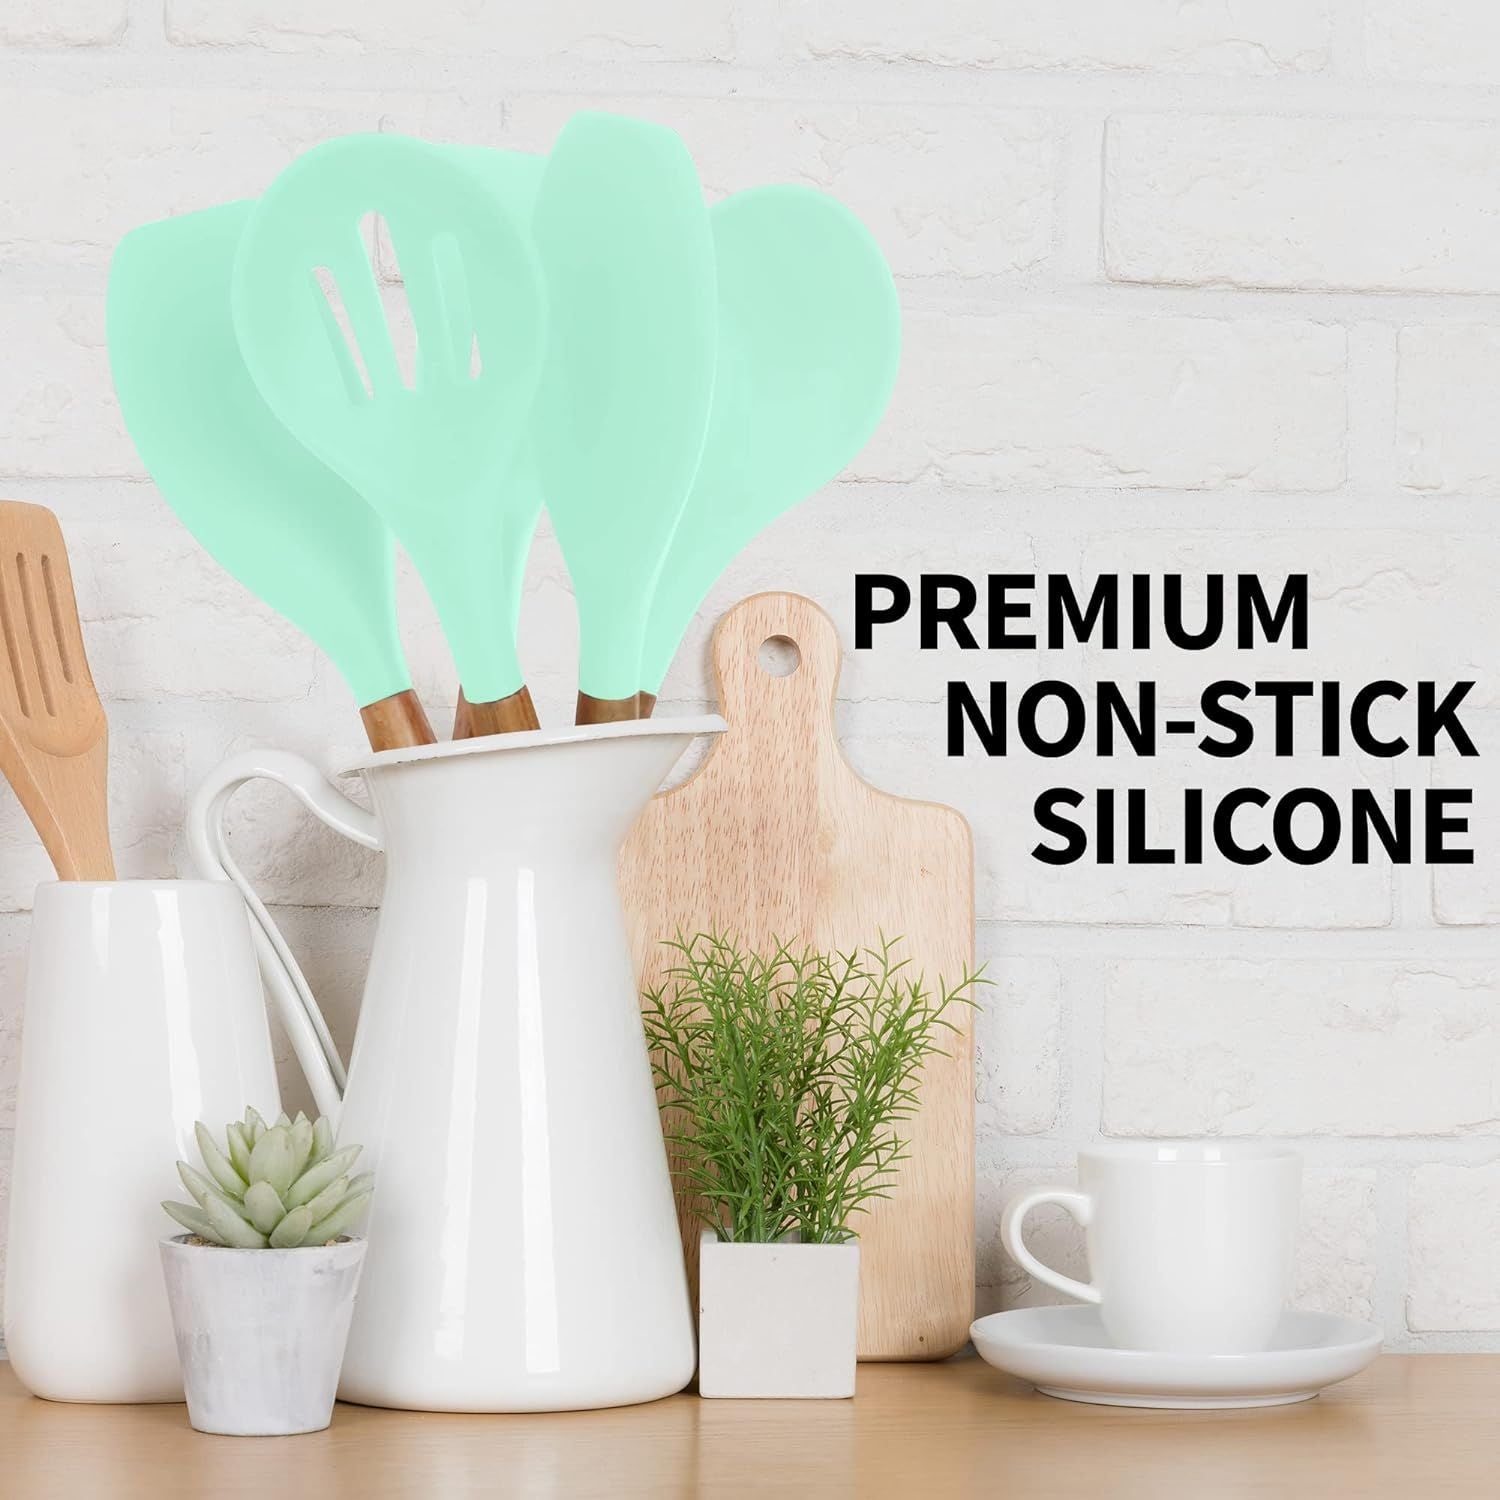 5 Piece Non-Stick Silicone Cooking Utensils Set - Mint